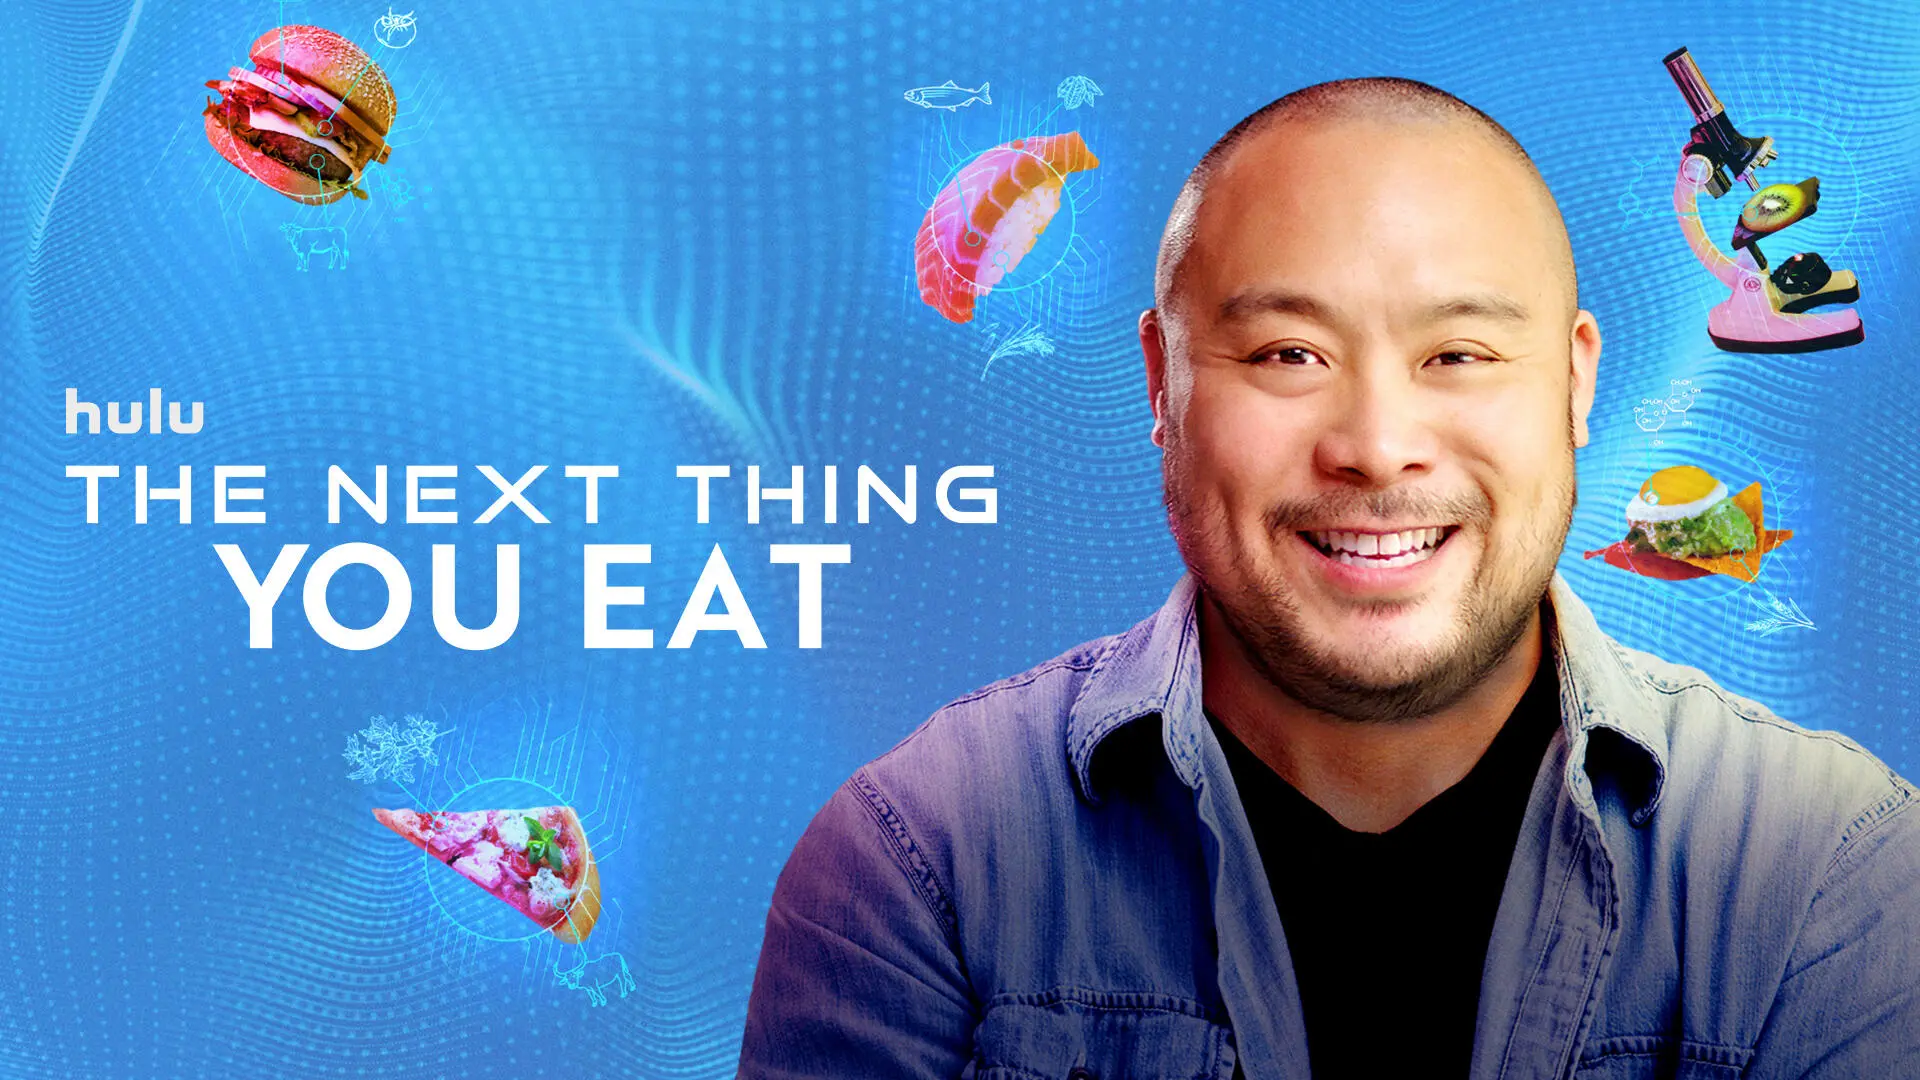 The Next Thing You Eat (2021)